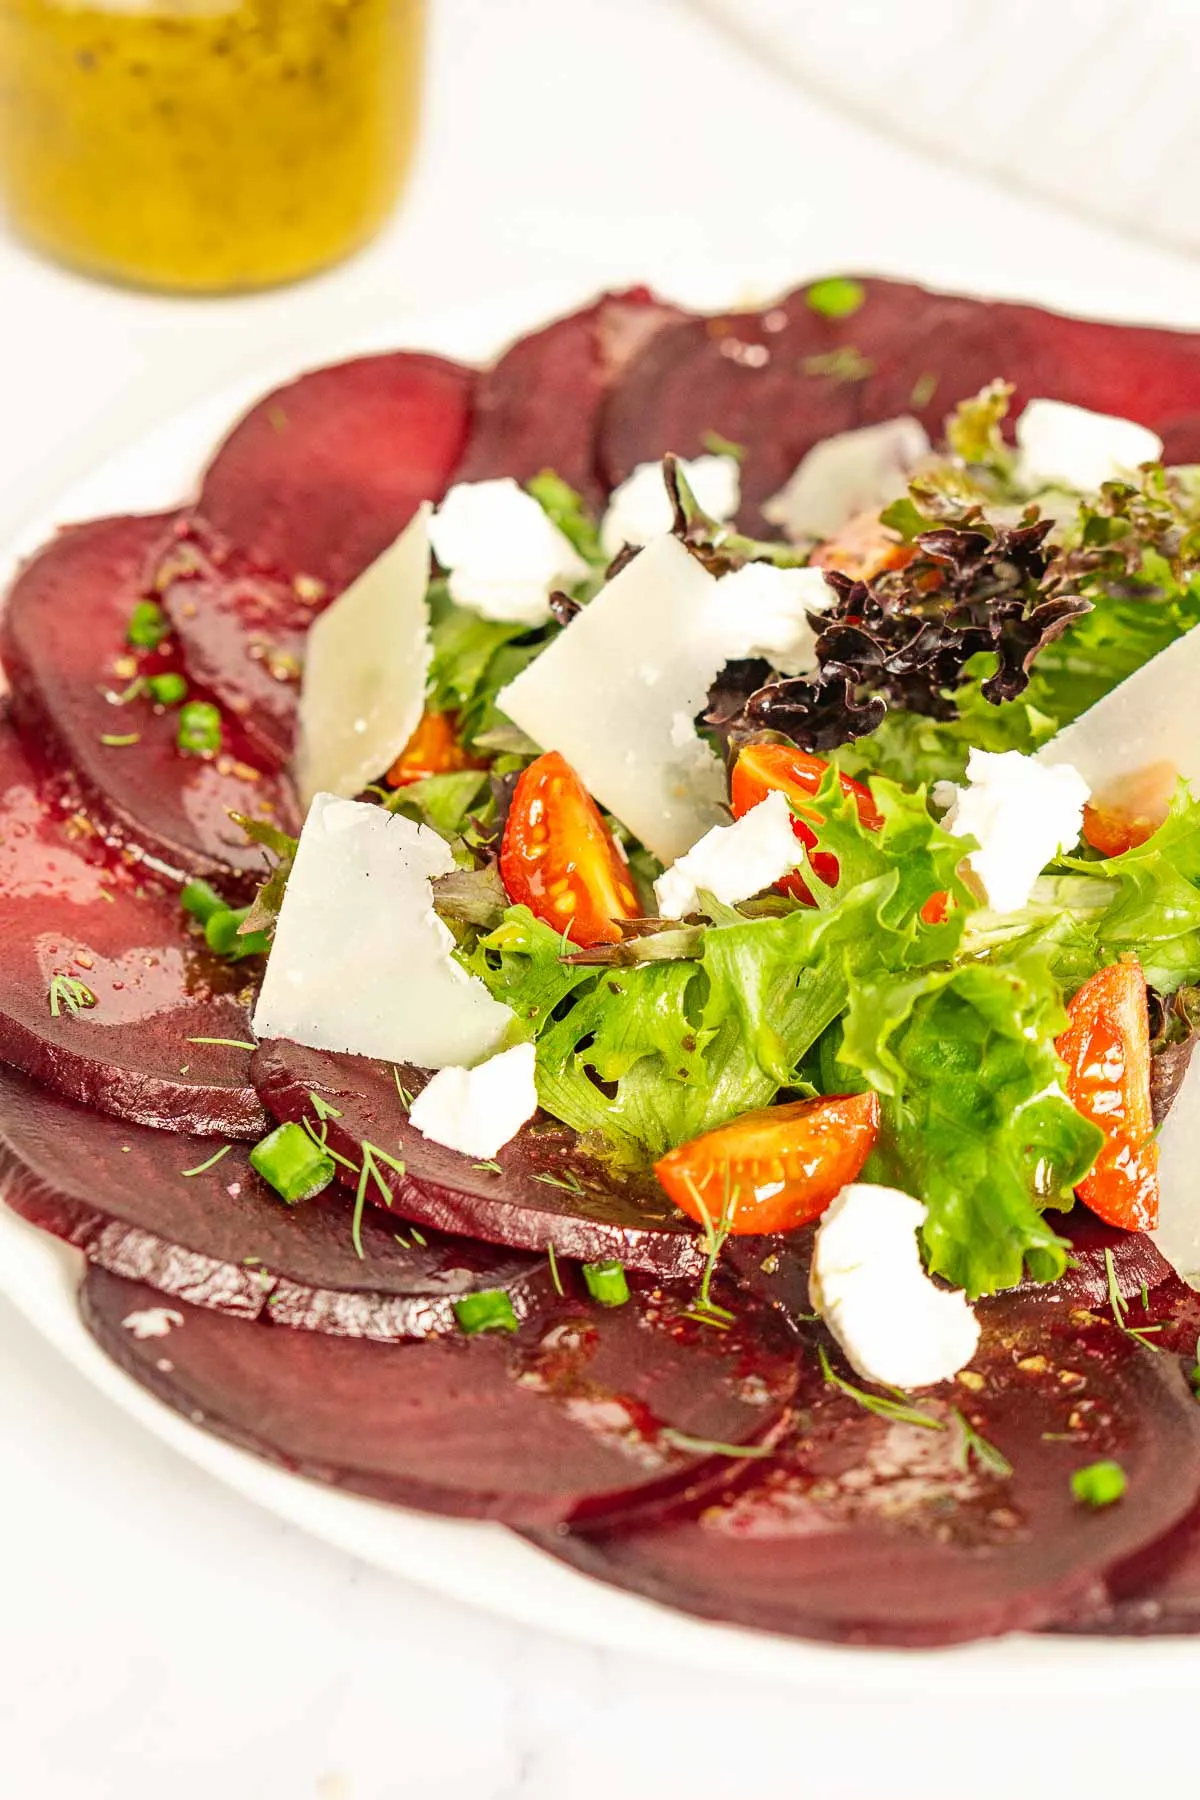 Sliced beet carpaccio topped with salad on a plate